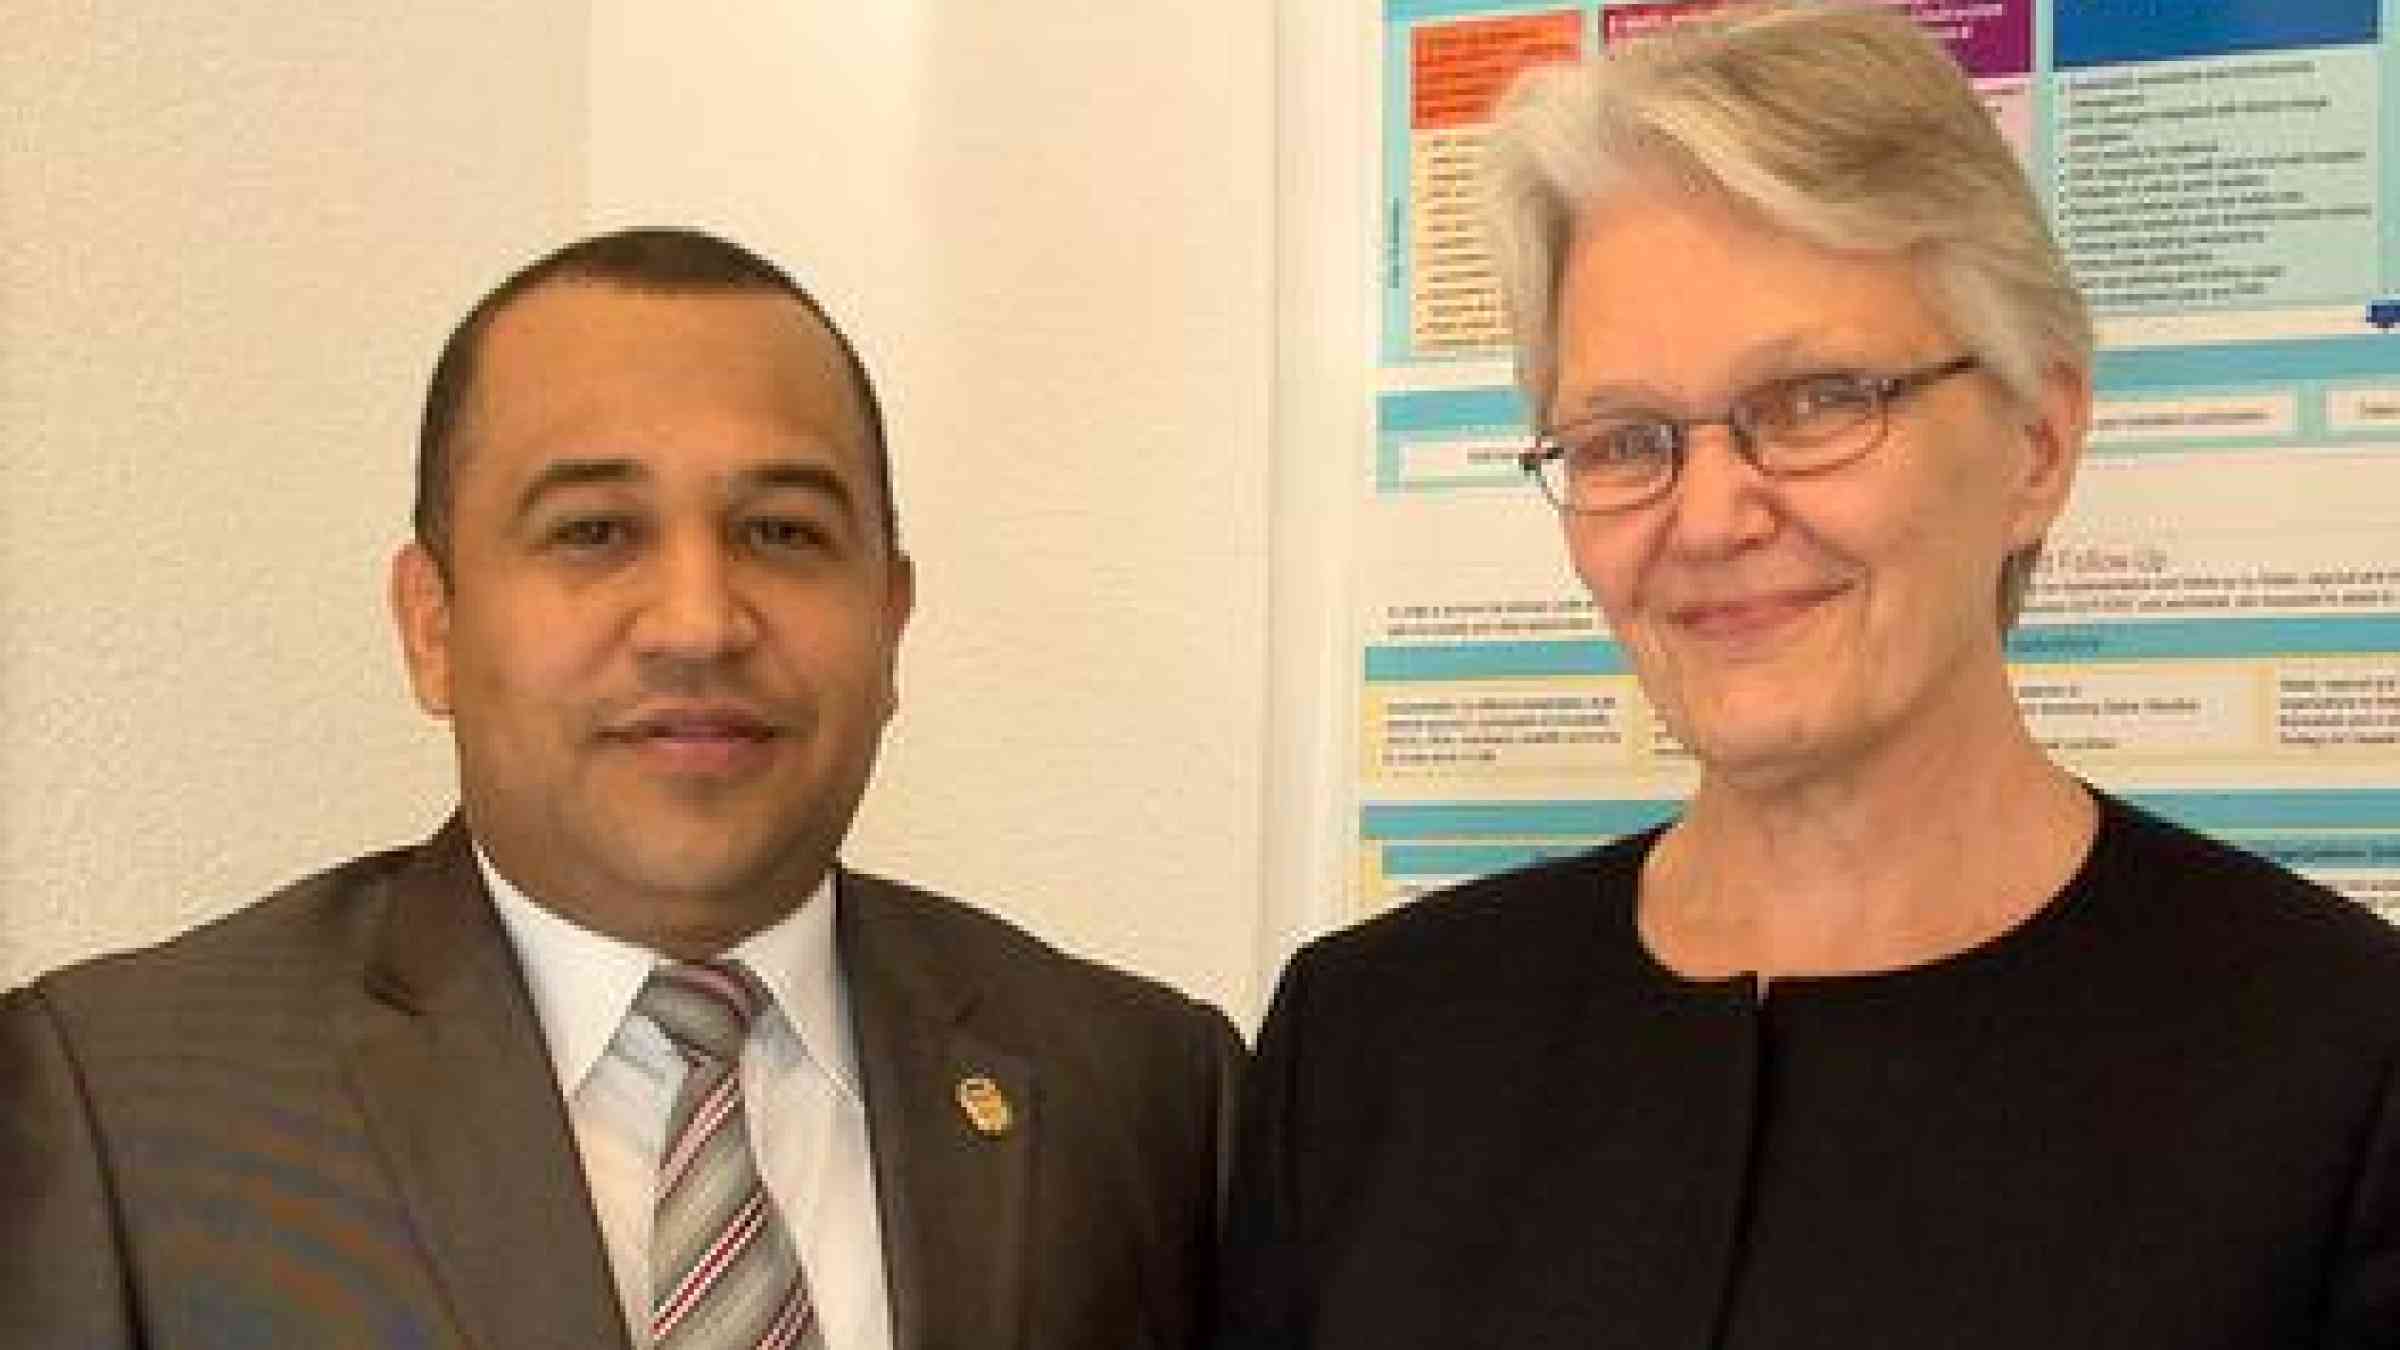 From left: Vice-President of the National Assembly of Panama, Rony Araúz, with Special Representative of the Secretary-General for Disaster Risk Reduction, Margareta Wahlström